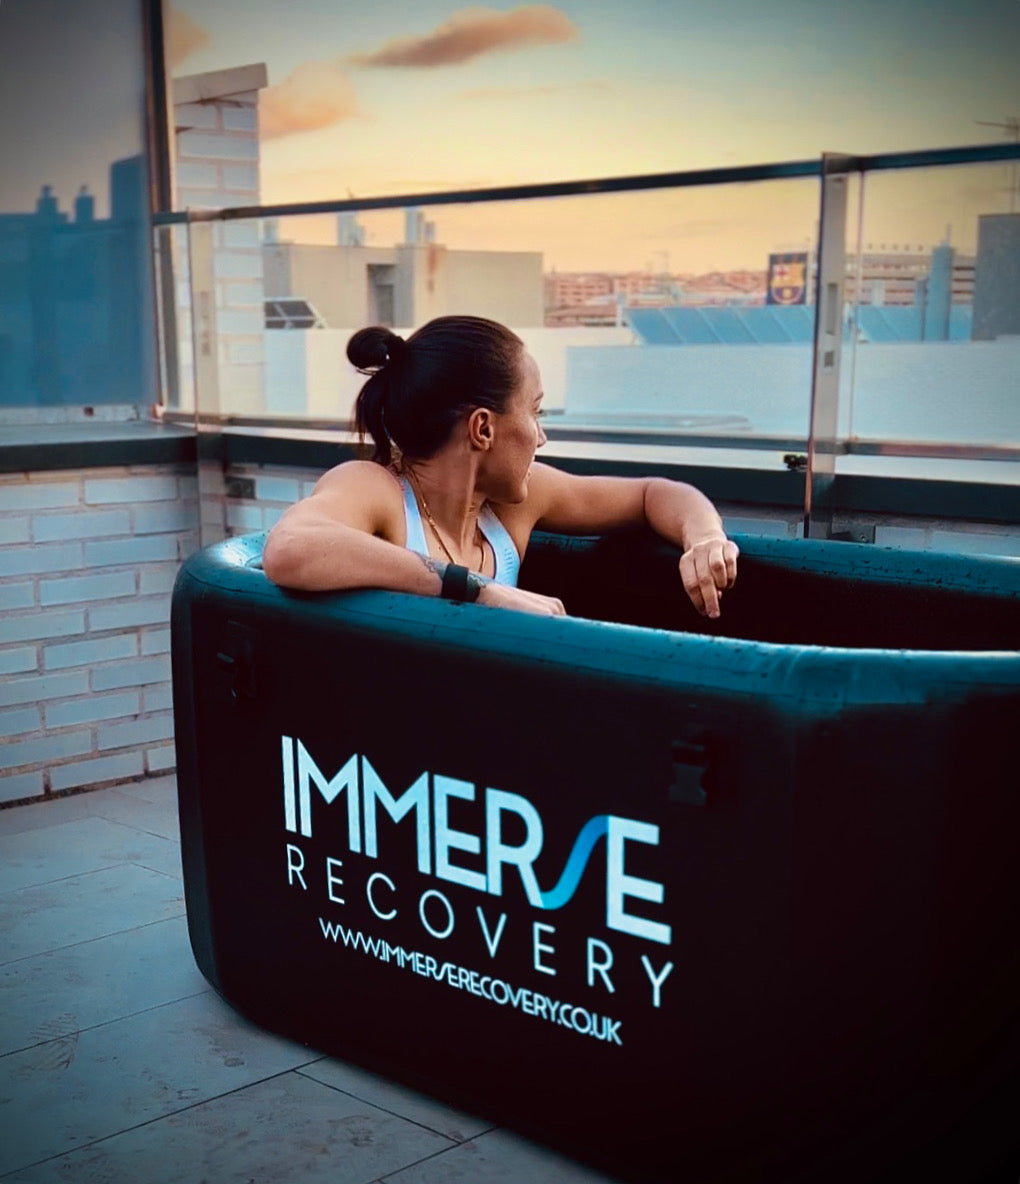 Professional cold plunge tub, ice bath, cold water therapy bath with lucy bronze footballer